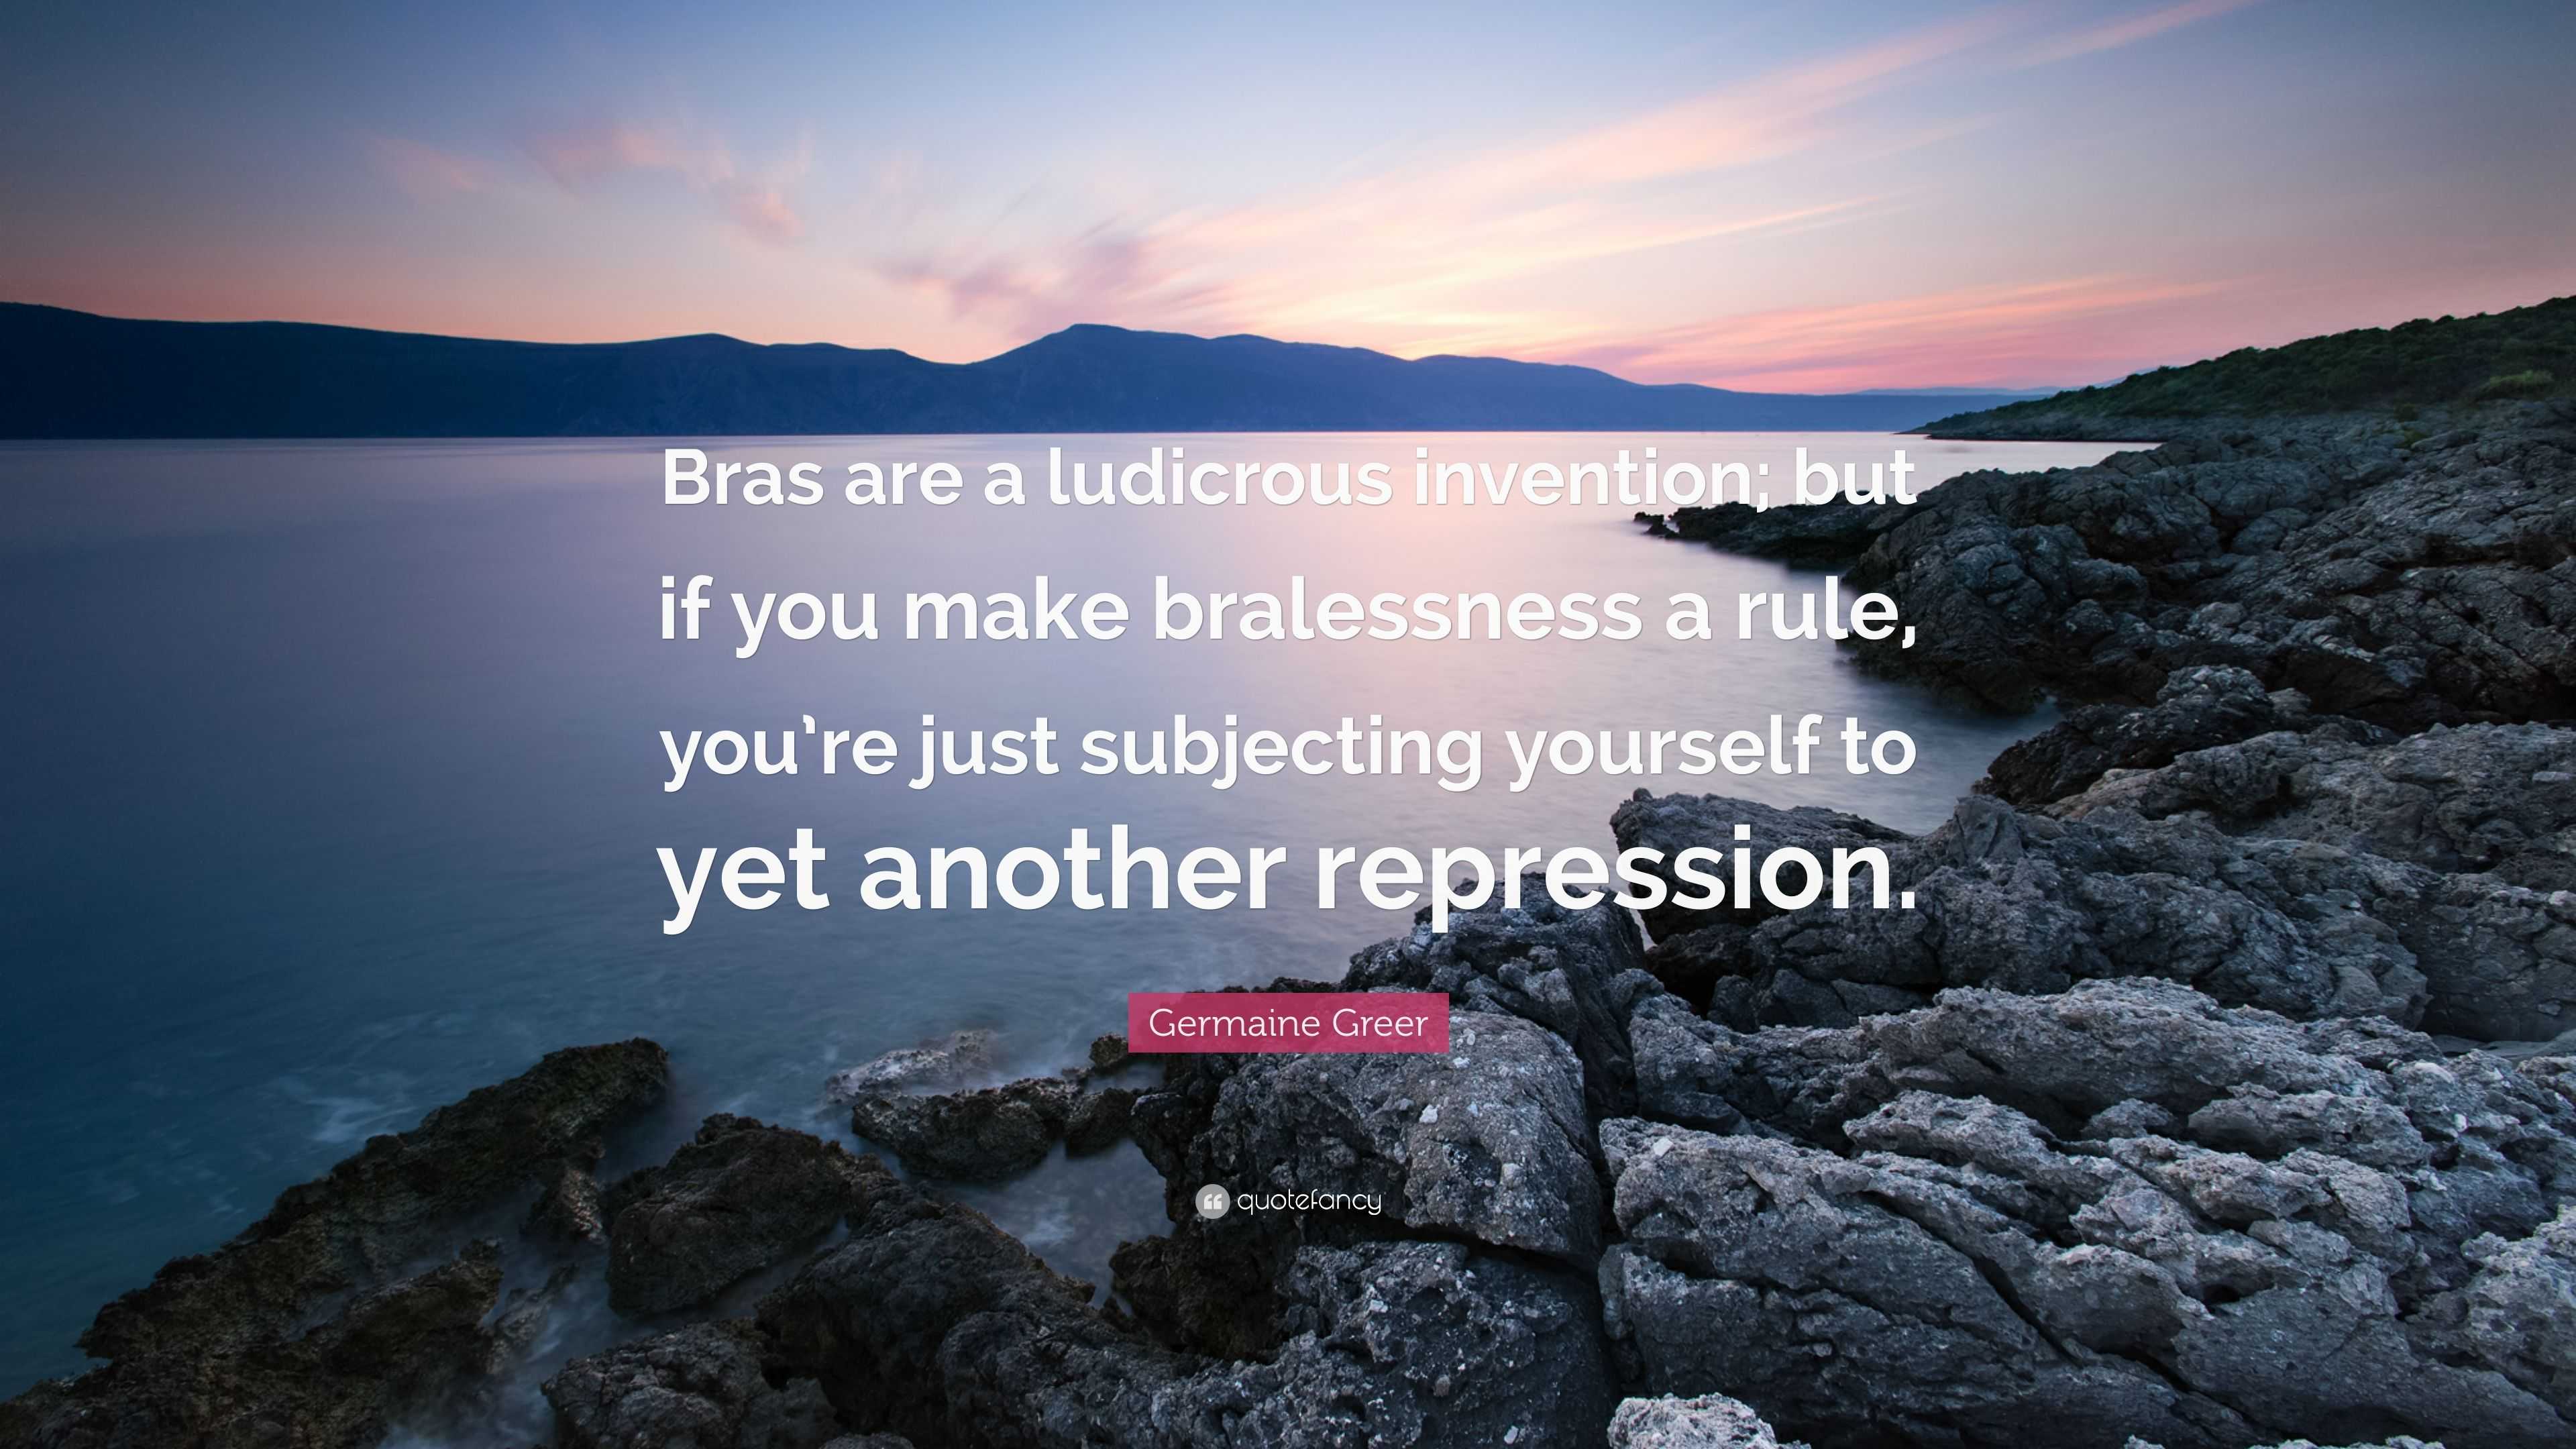 Germaine Greer Quote: “Bras are a ludicrous invention; but if you make  bralessness a rule, you're just subjecting yourself to yet another repre”